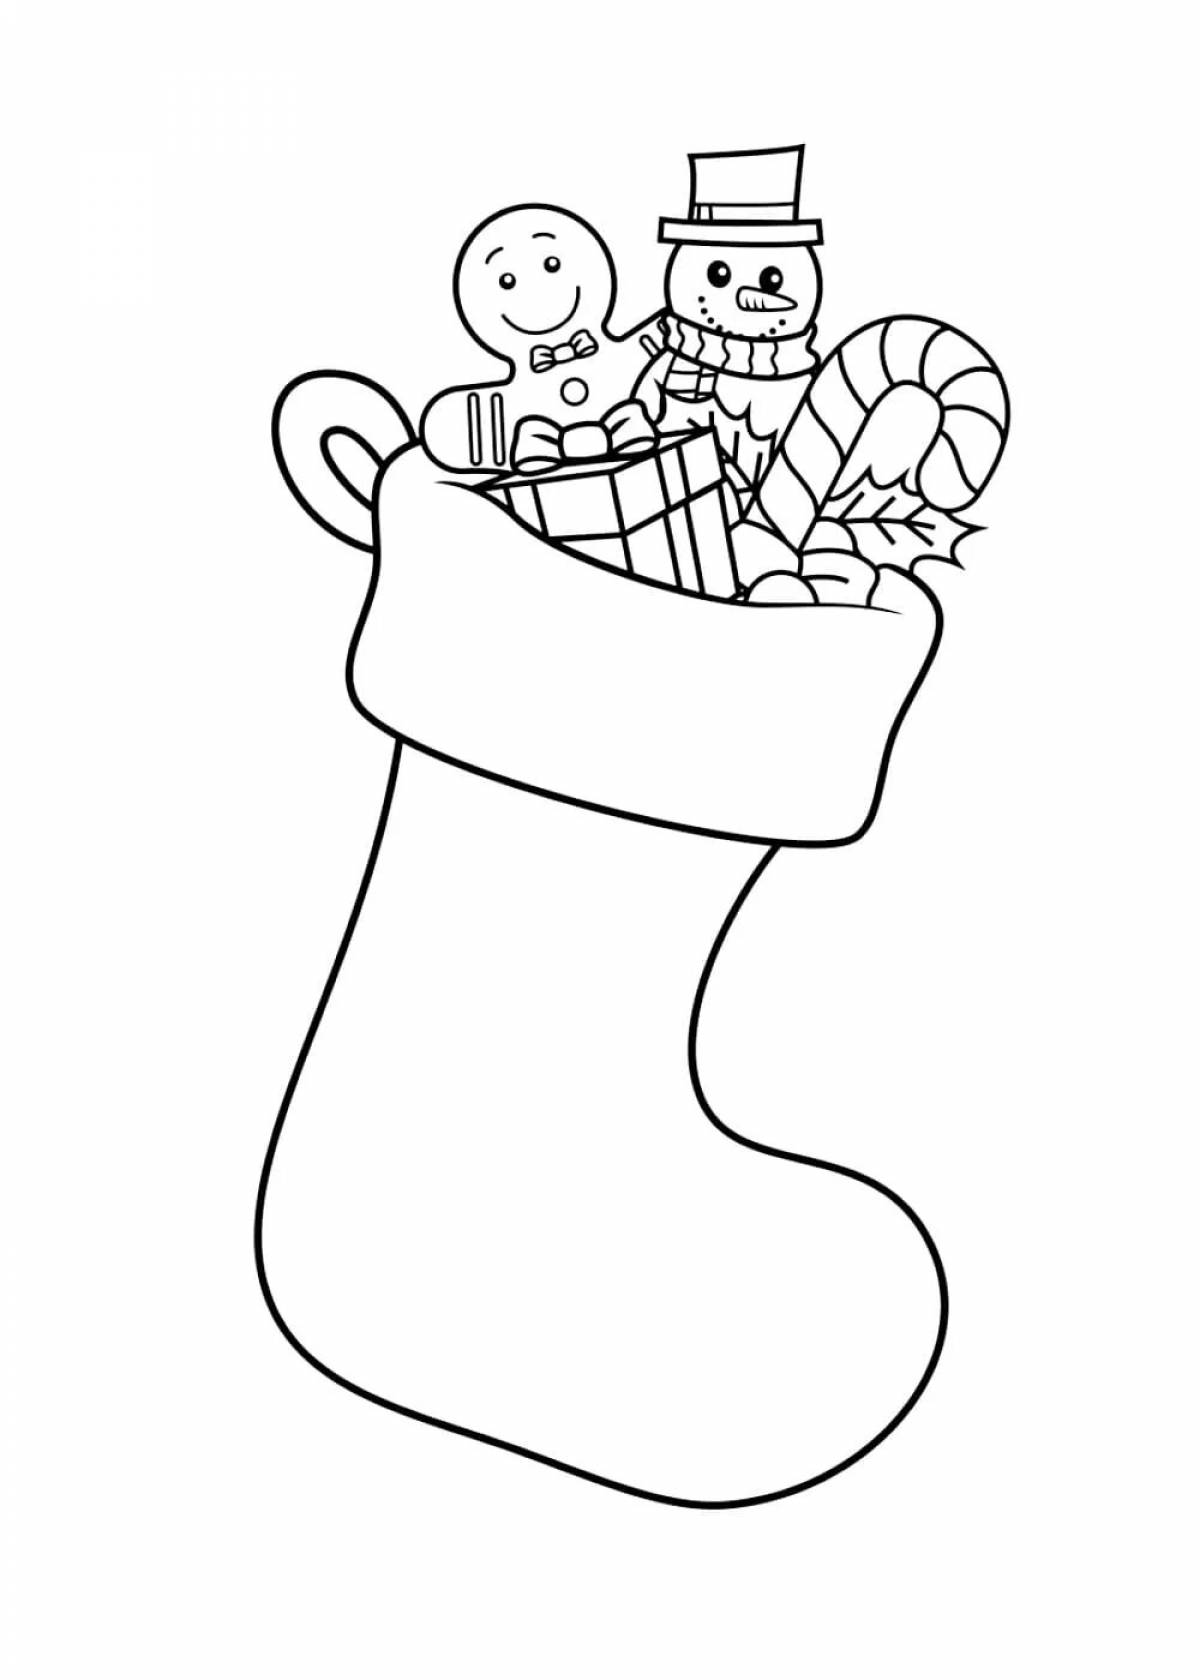 Attractive stocking coloring page